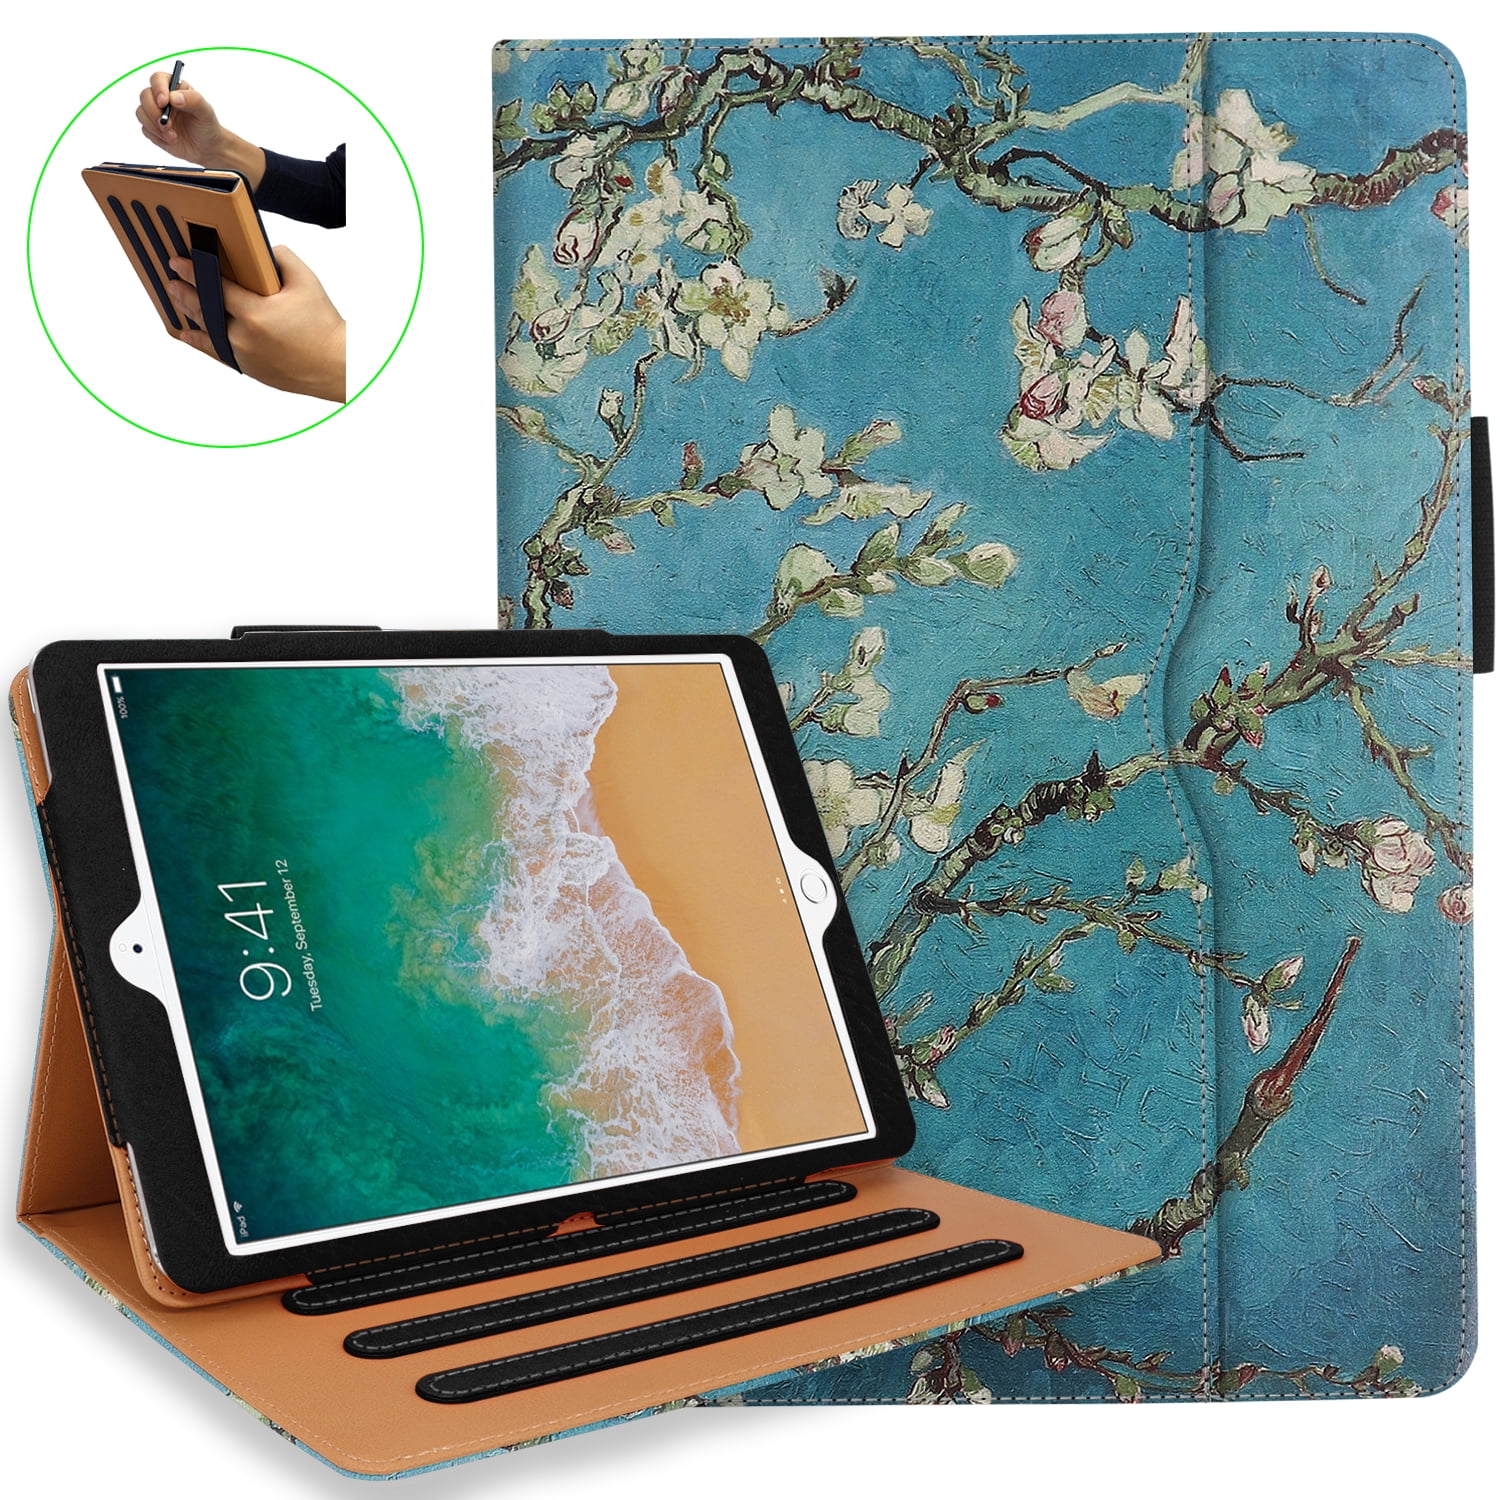 iPad 9th Generation Case, iPad Air 5th Generation Case, Rose Gold Floral  Leaf Print iPad Pro 11 Inch iPad Case 10.2 Case 10.9 Case with Pencil  Holder